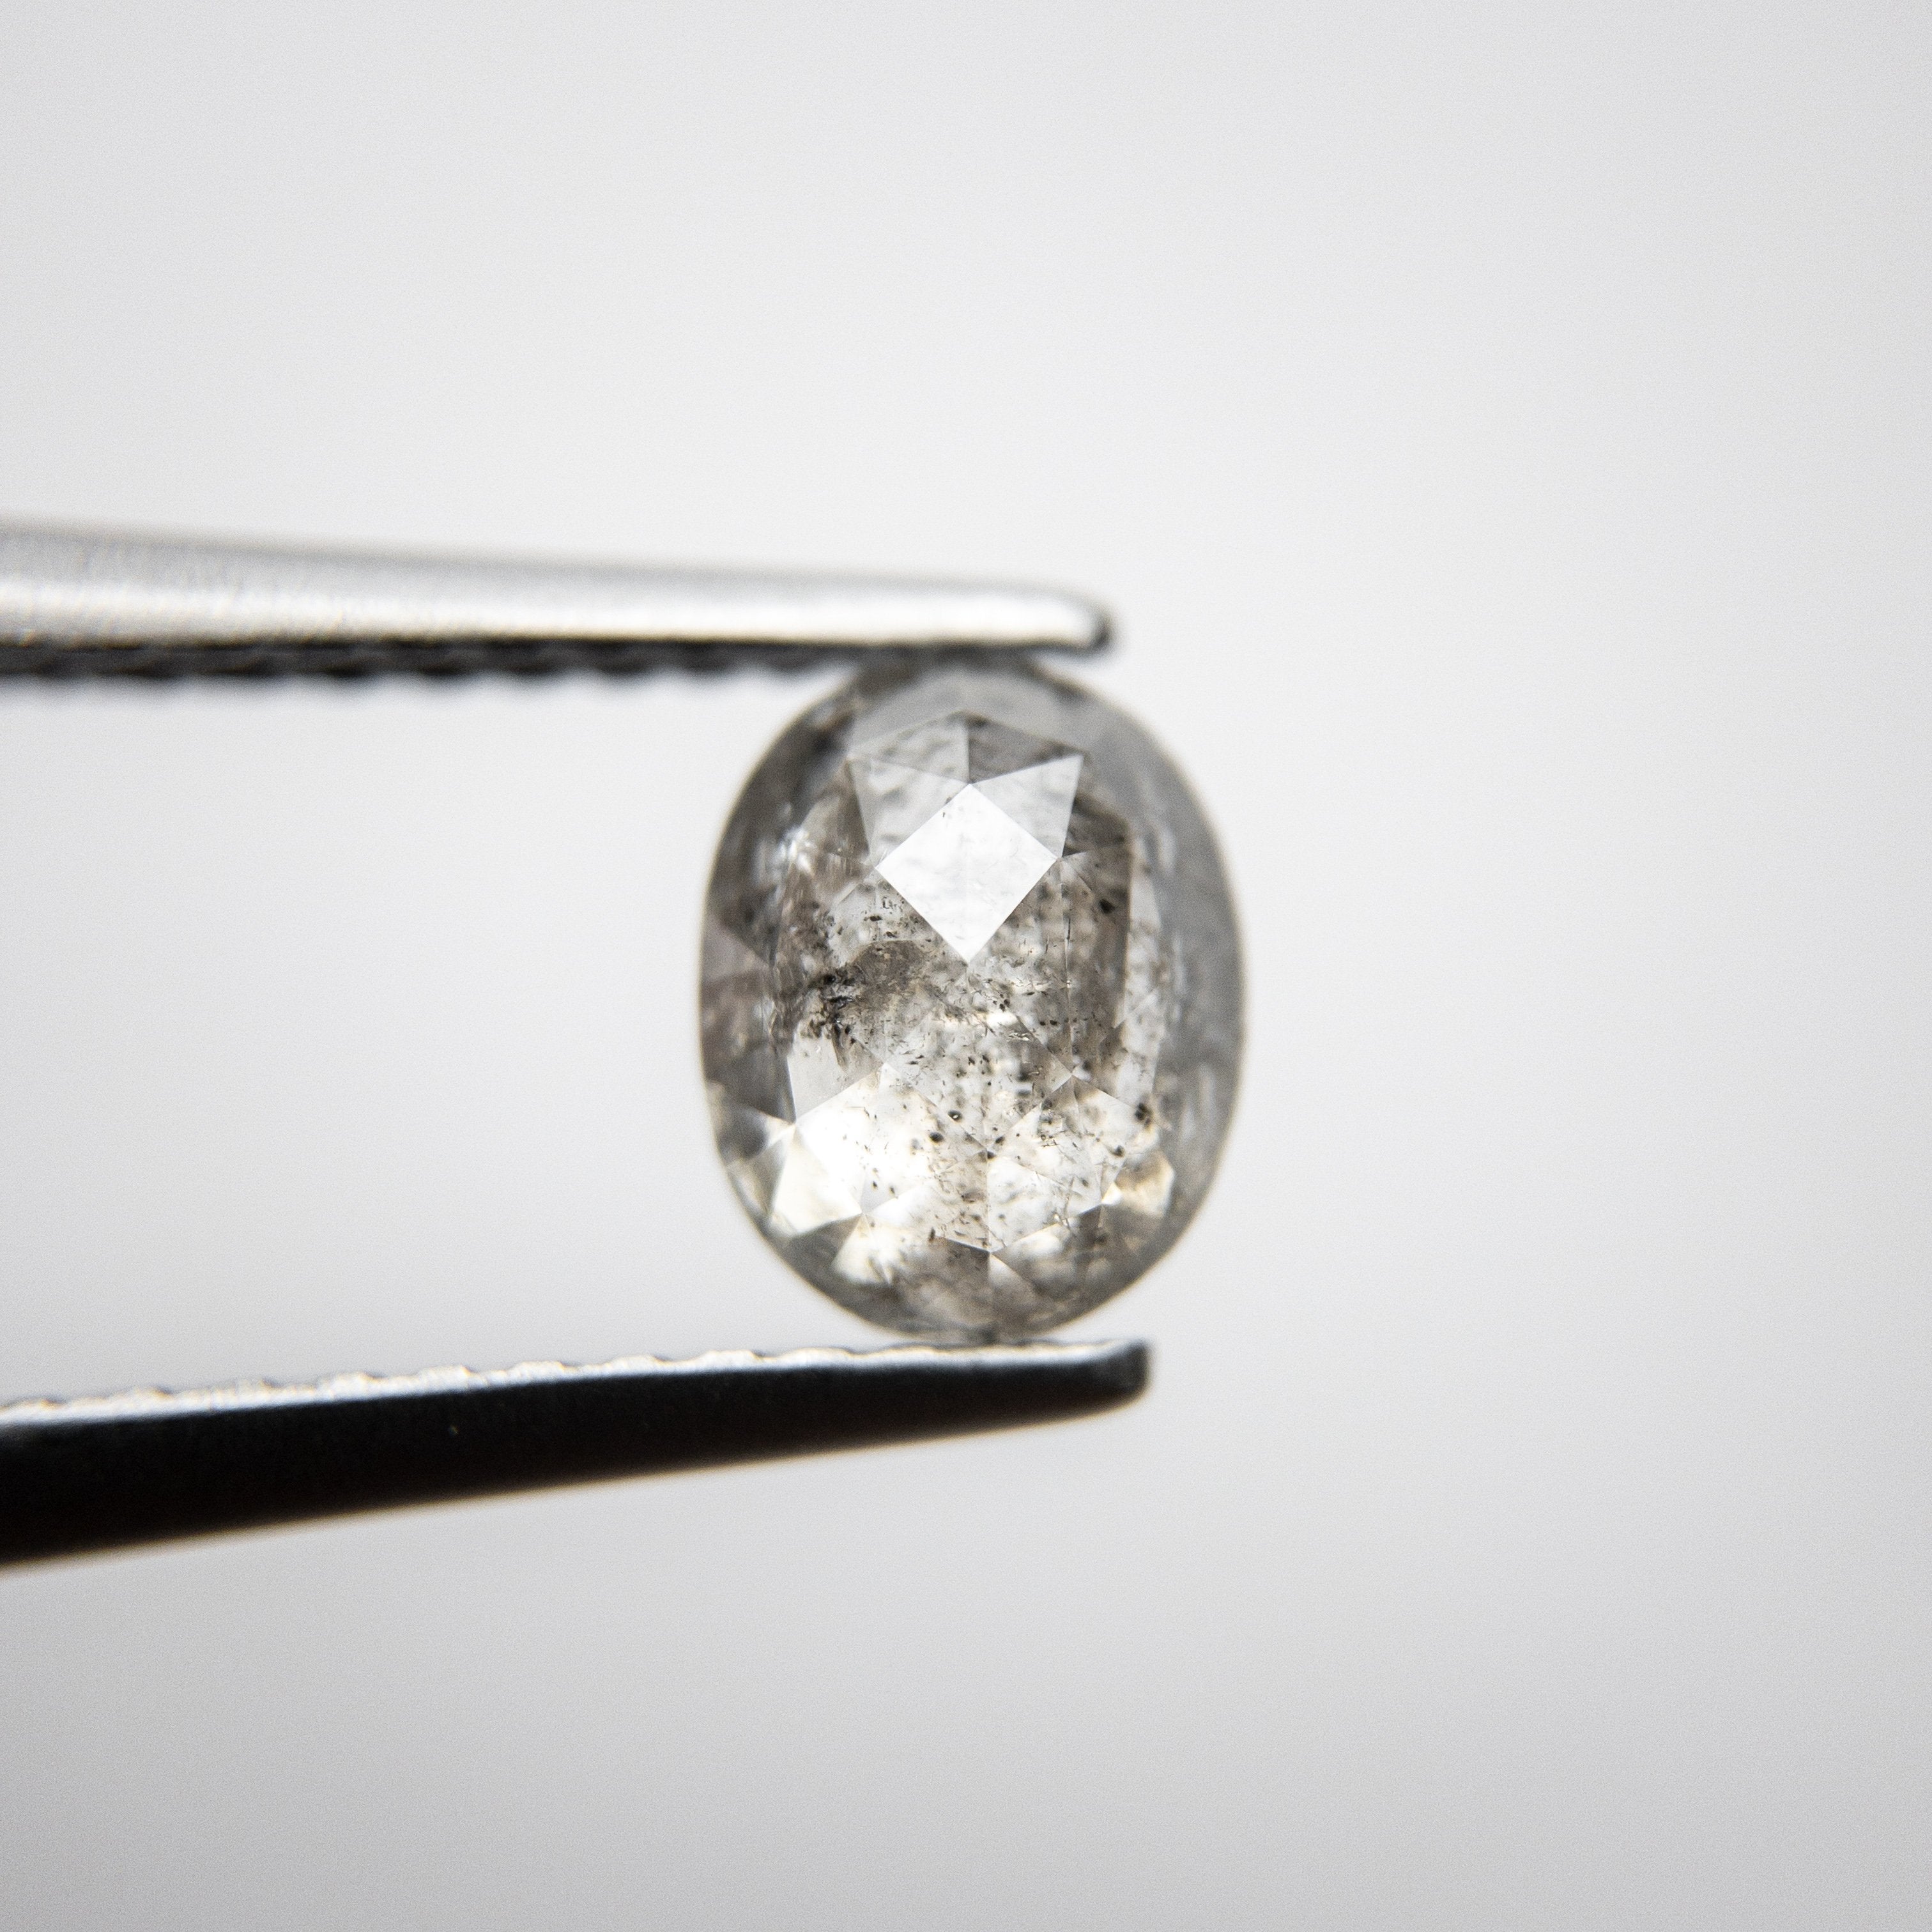 1.12ct 6.88x5.49x3.26mm Double Cut Oval 18224-05